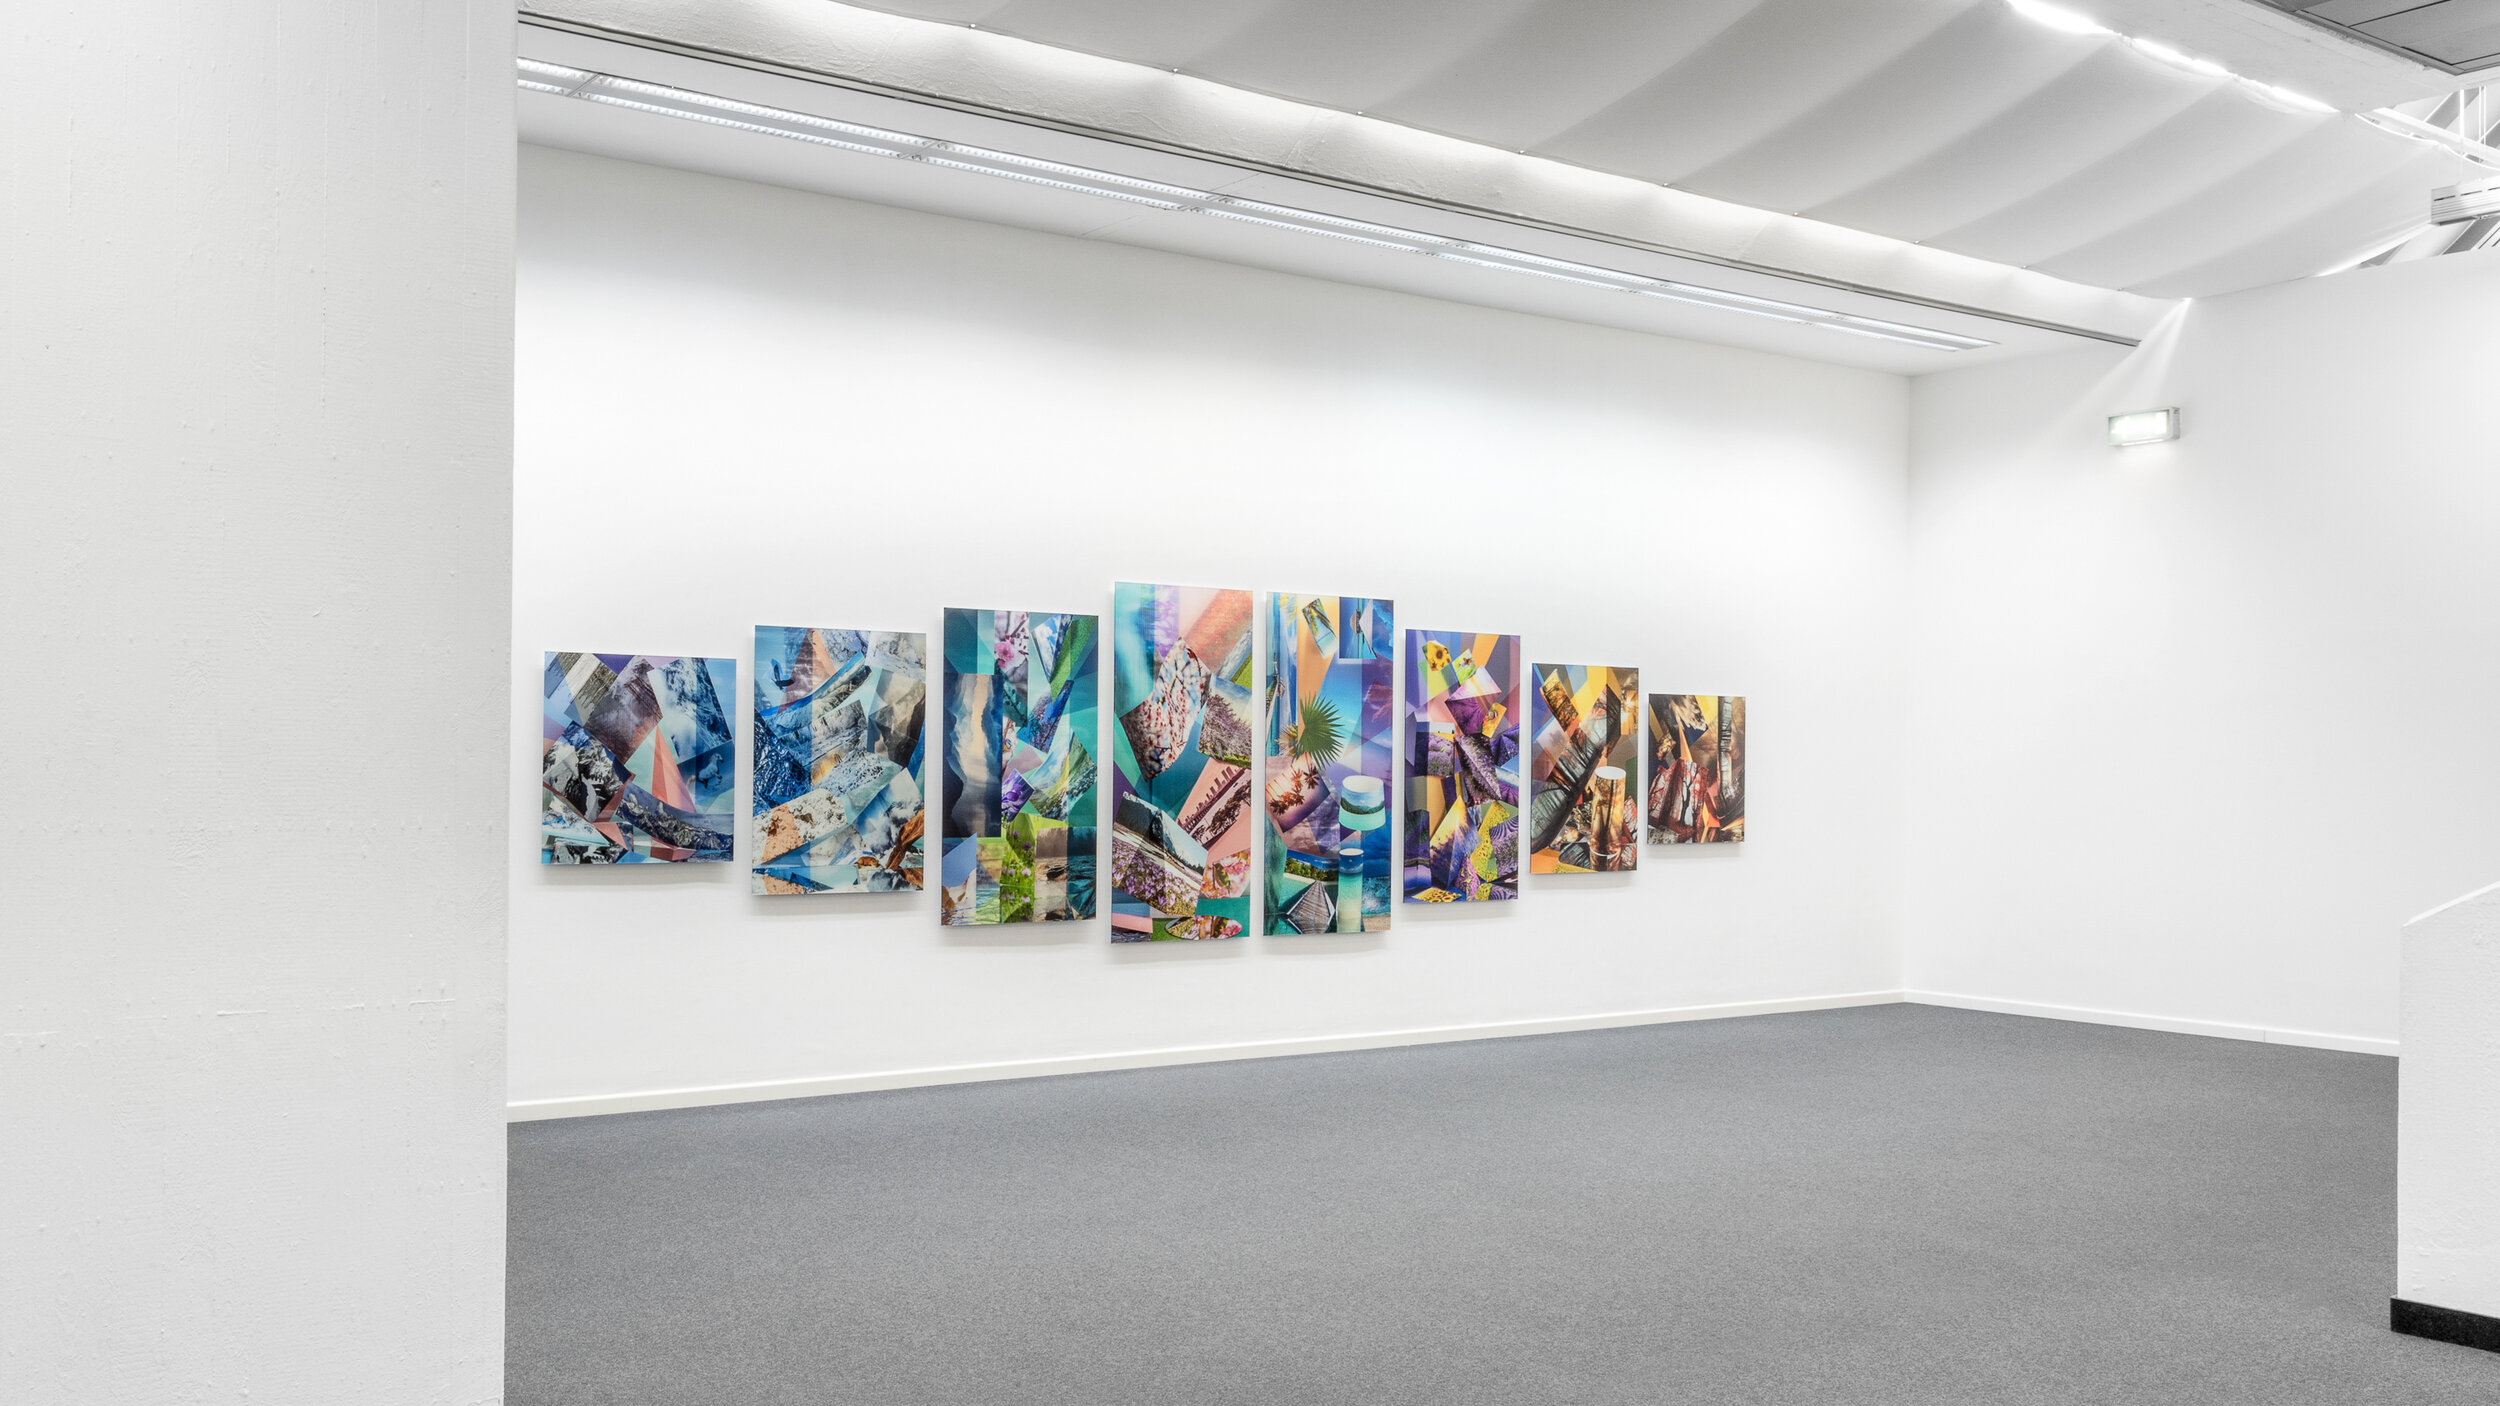   Installation view, Landscape Sublime, Biennale of Contemporary Photography, Germany, 2020  